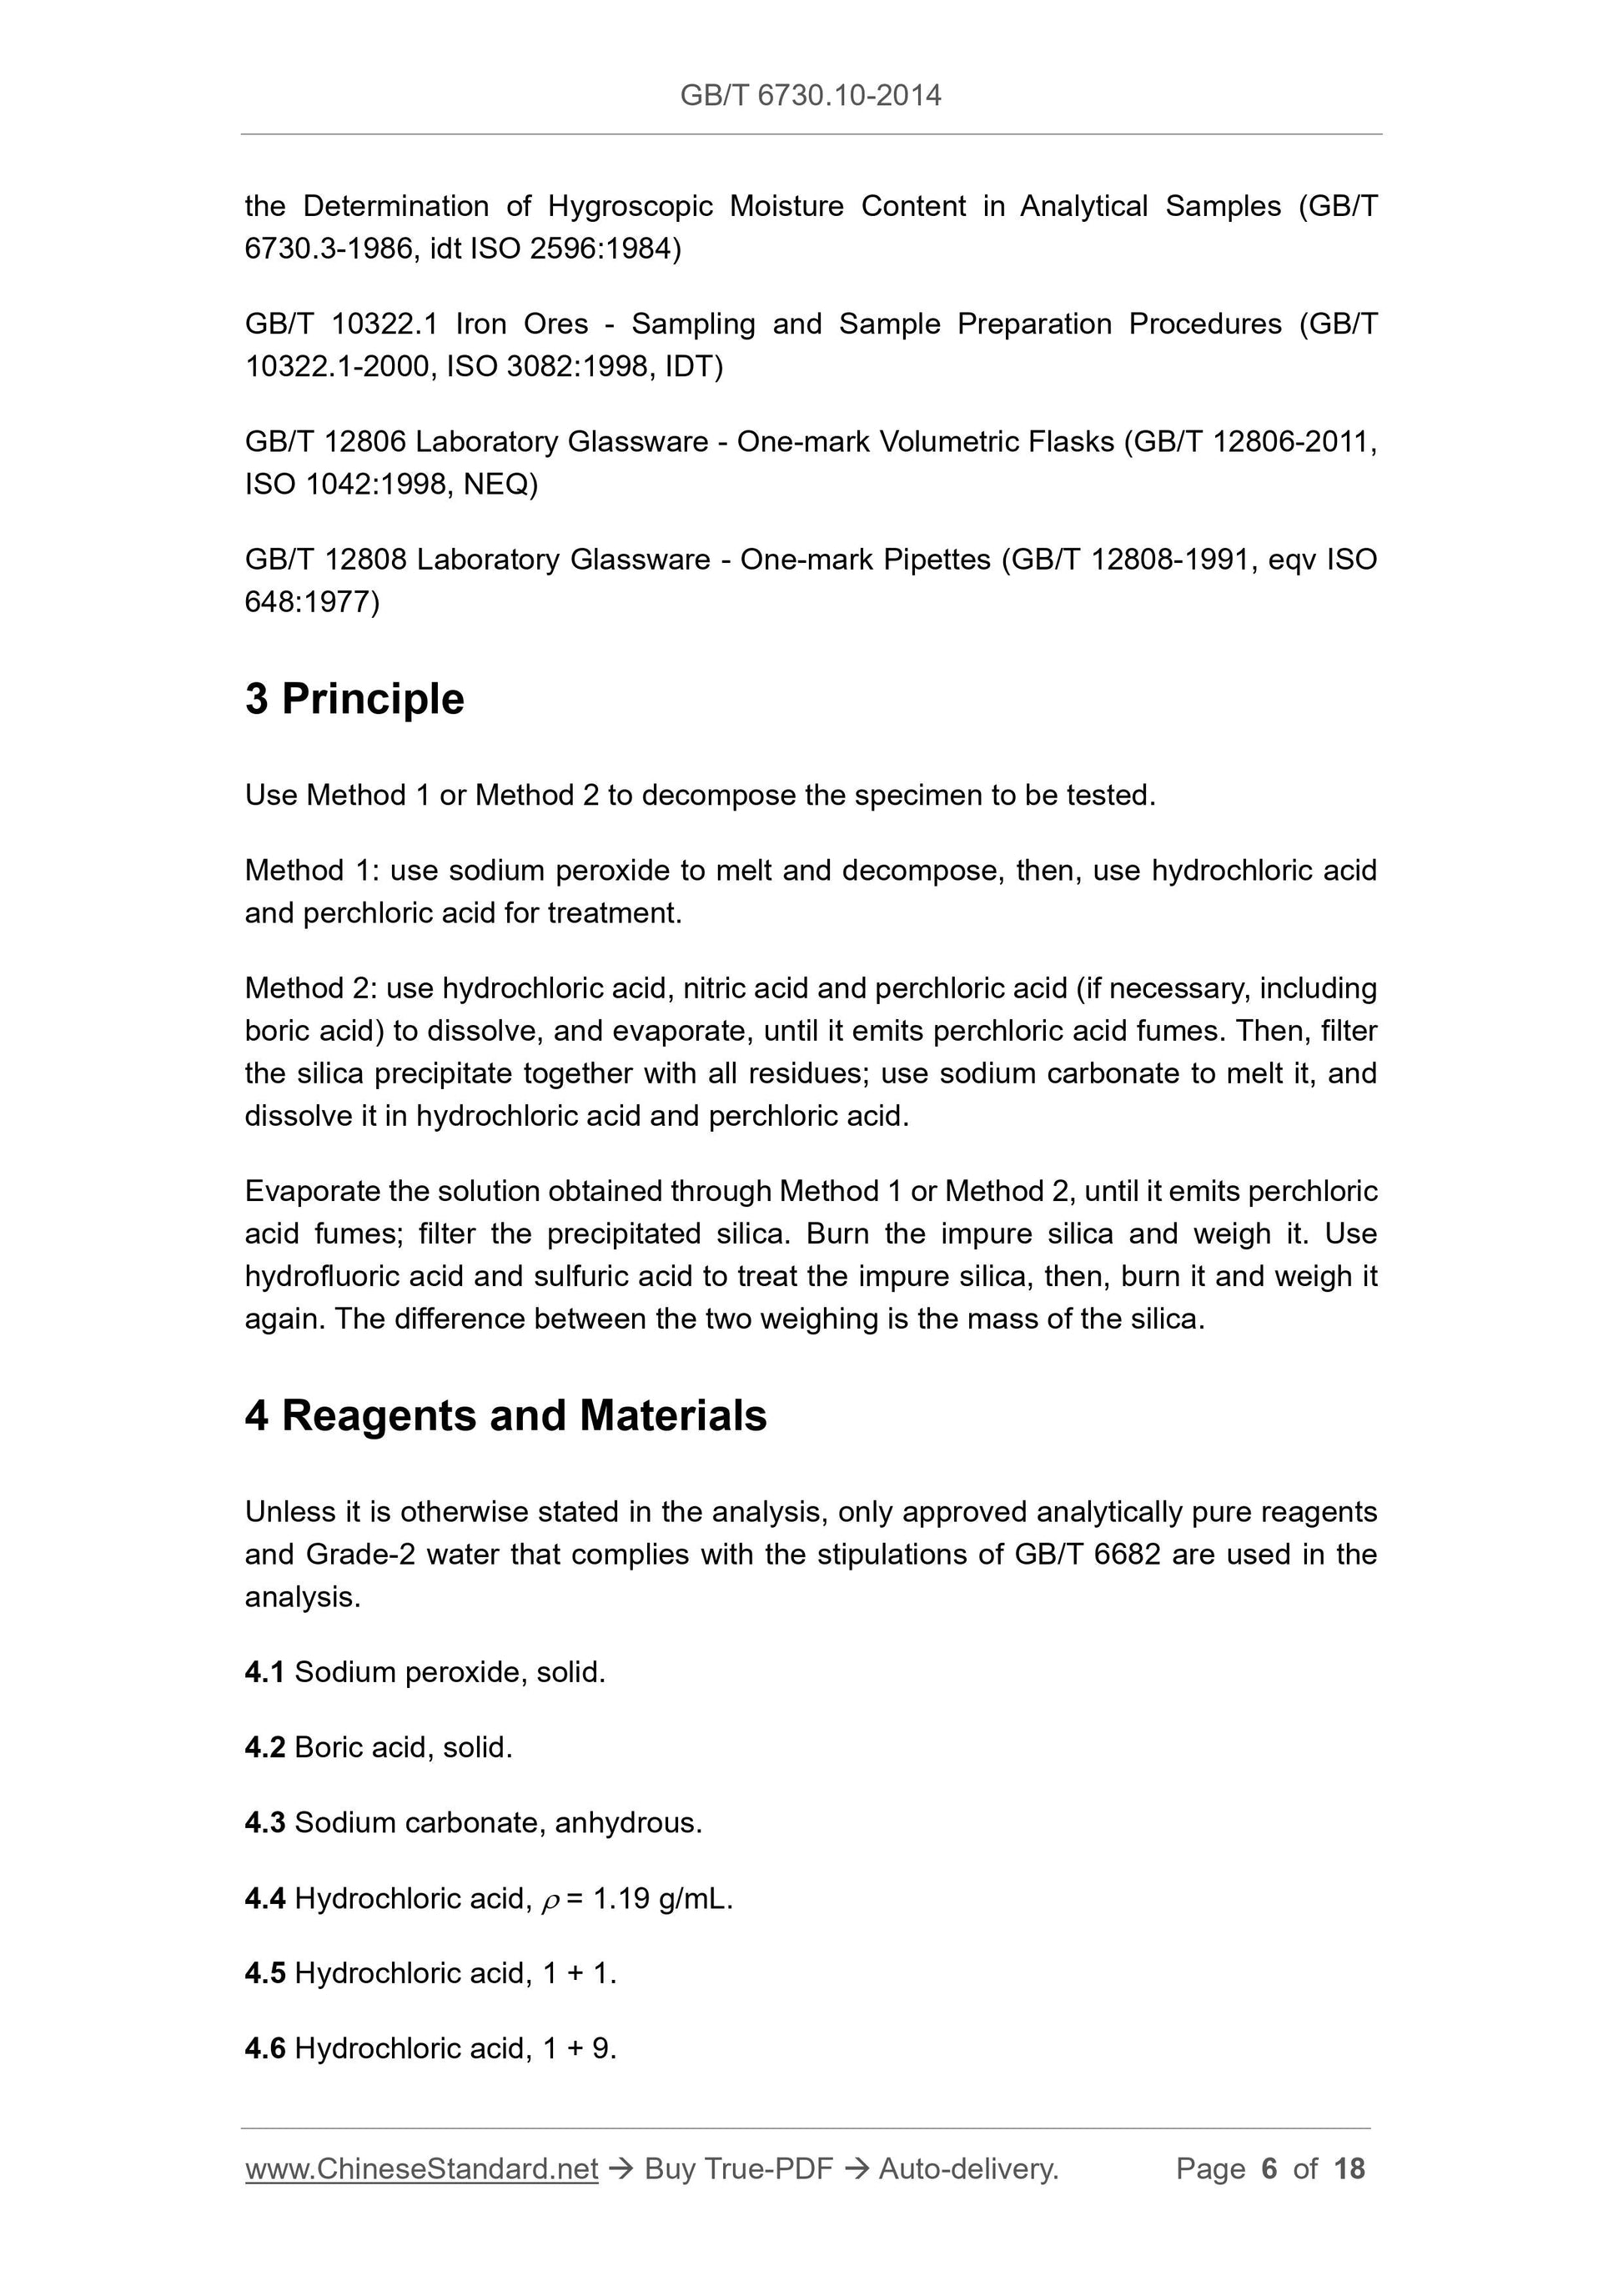 GB/T 6730.10-2014 Page 4